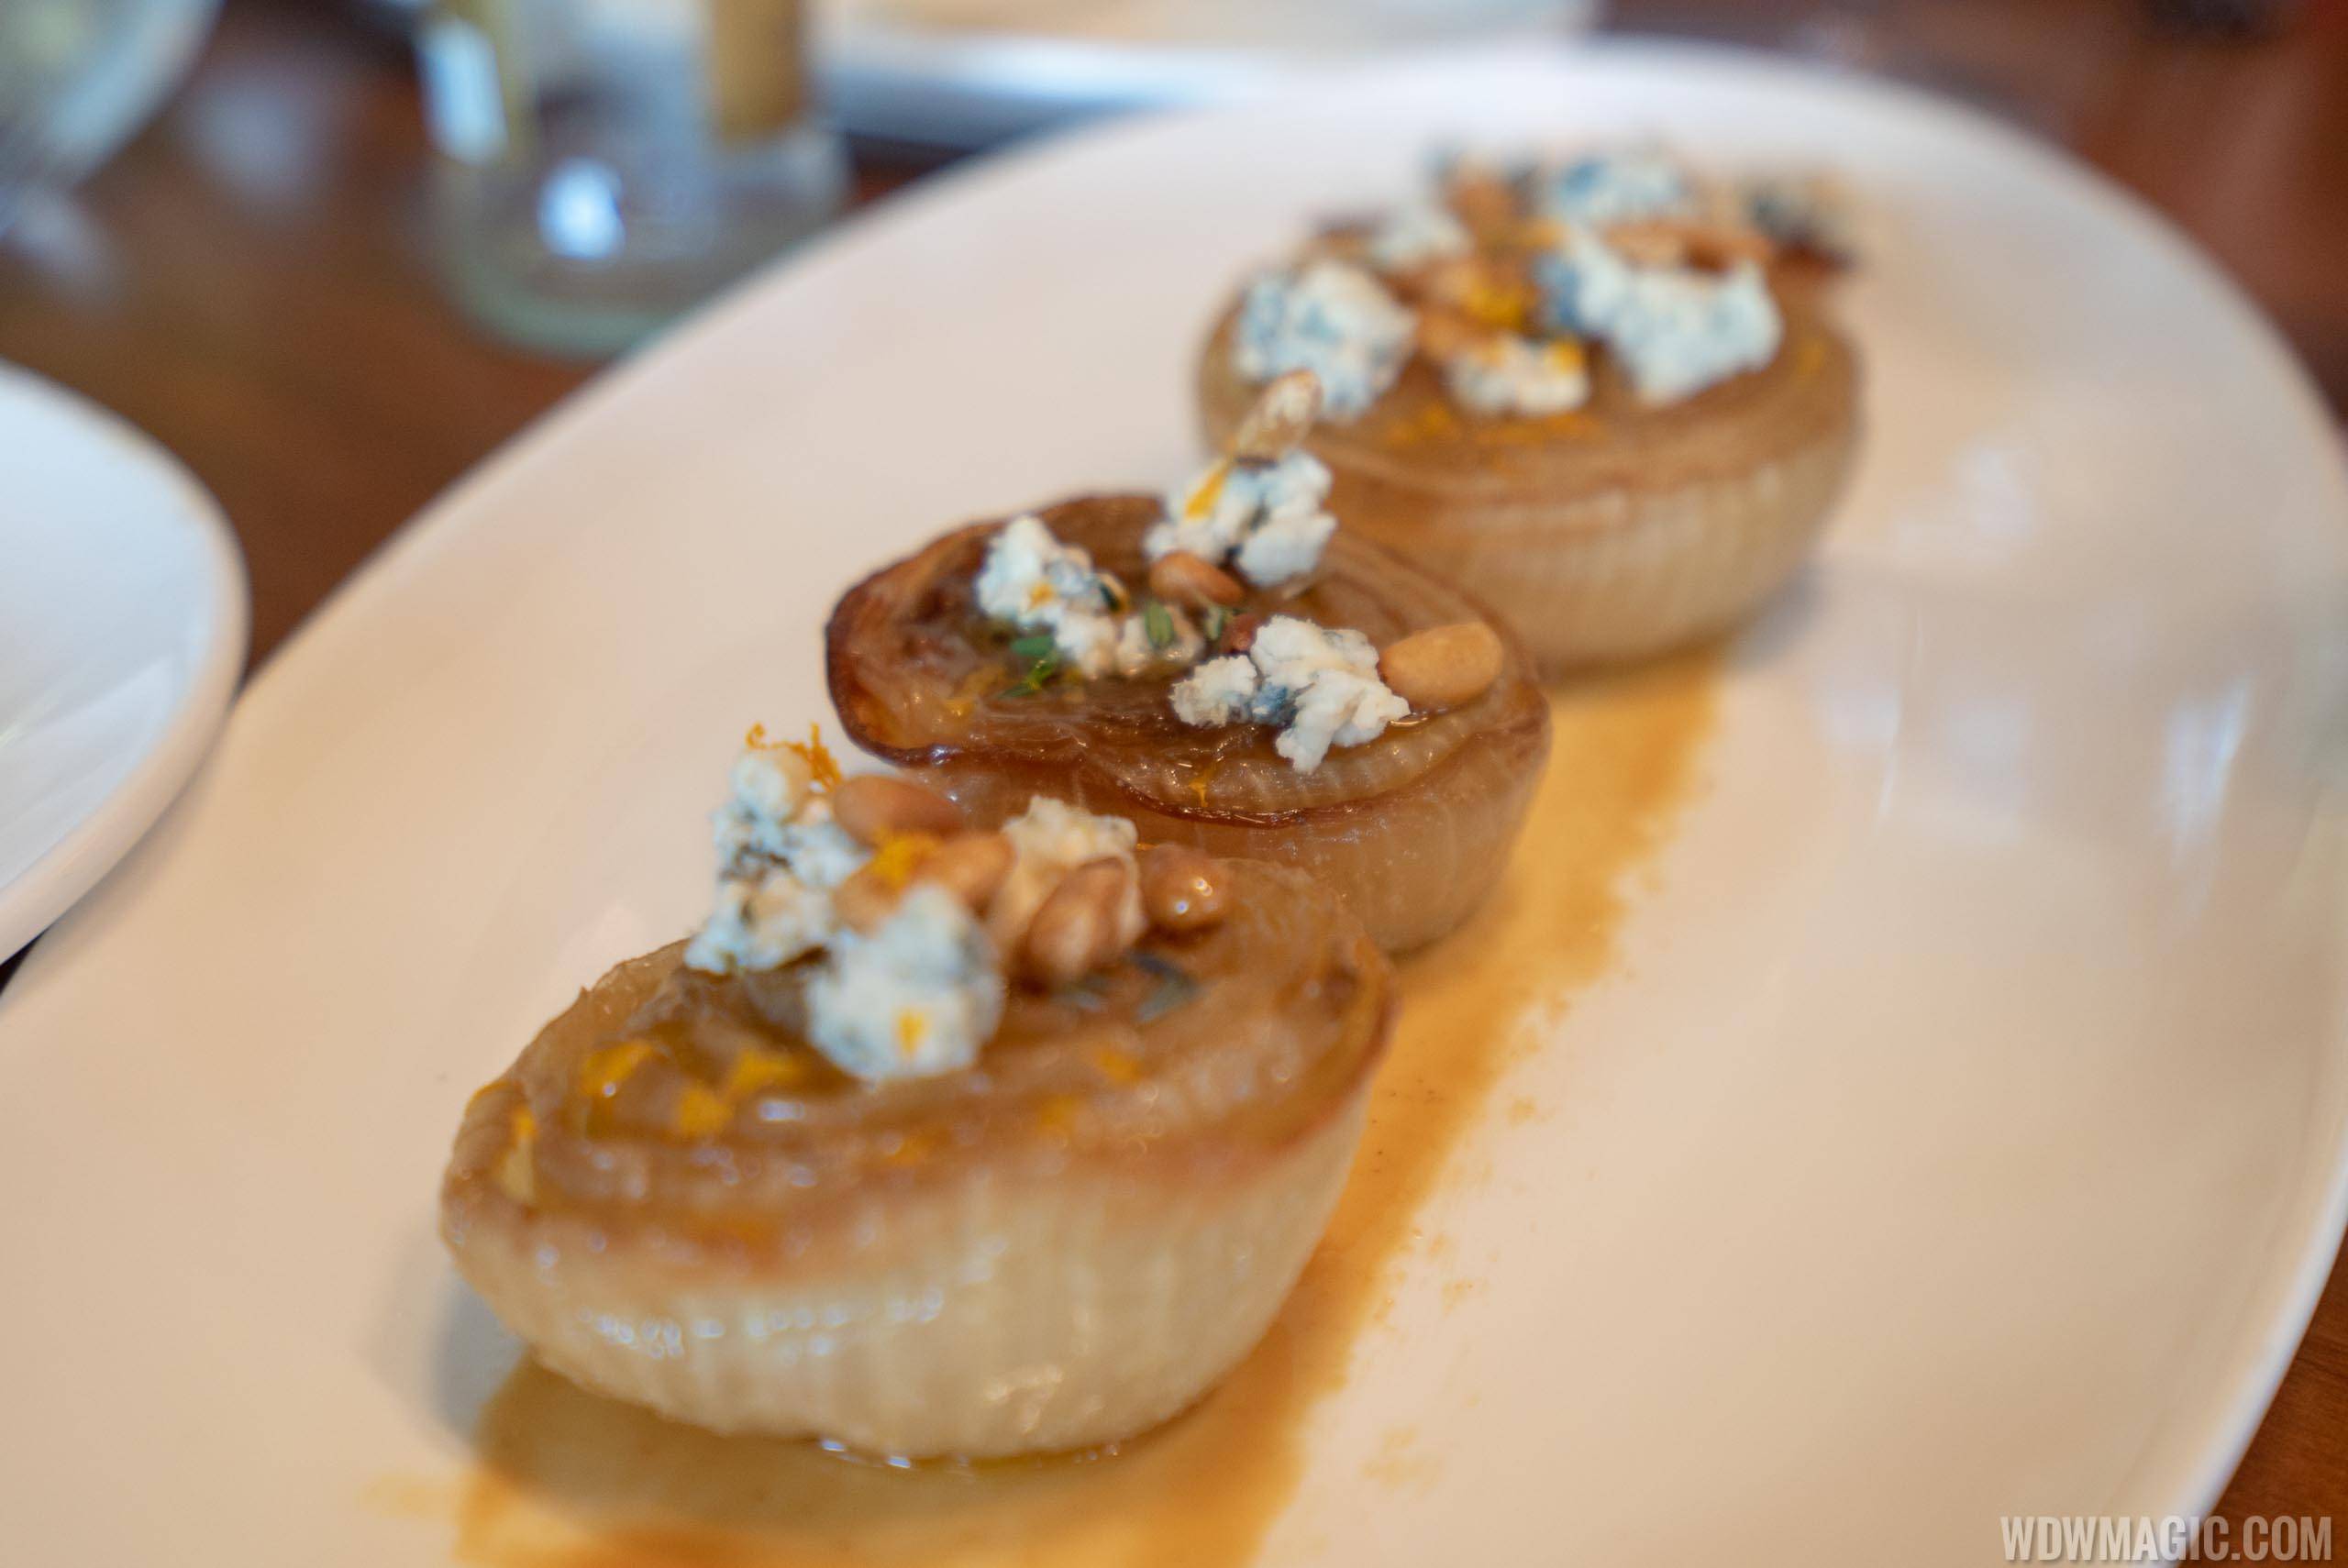 Chef's tasting menu: José's Way - Roasted sweet onions, pine nuts, and La Peral blue cheese